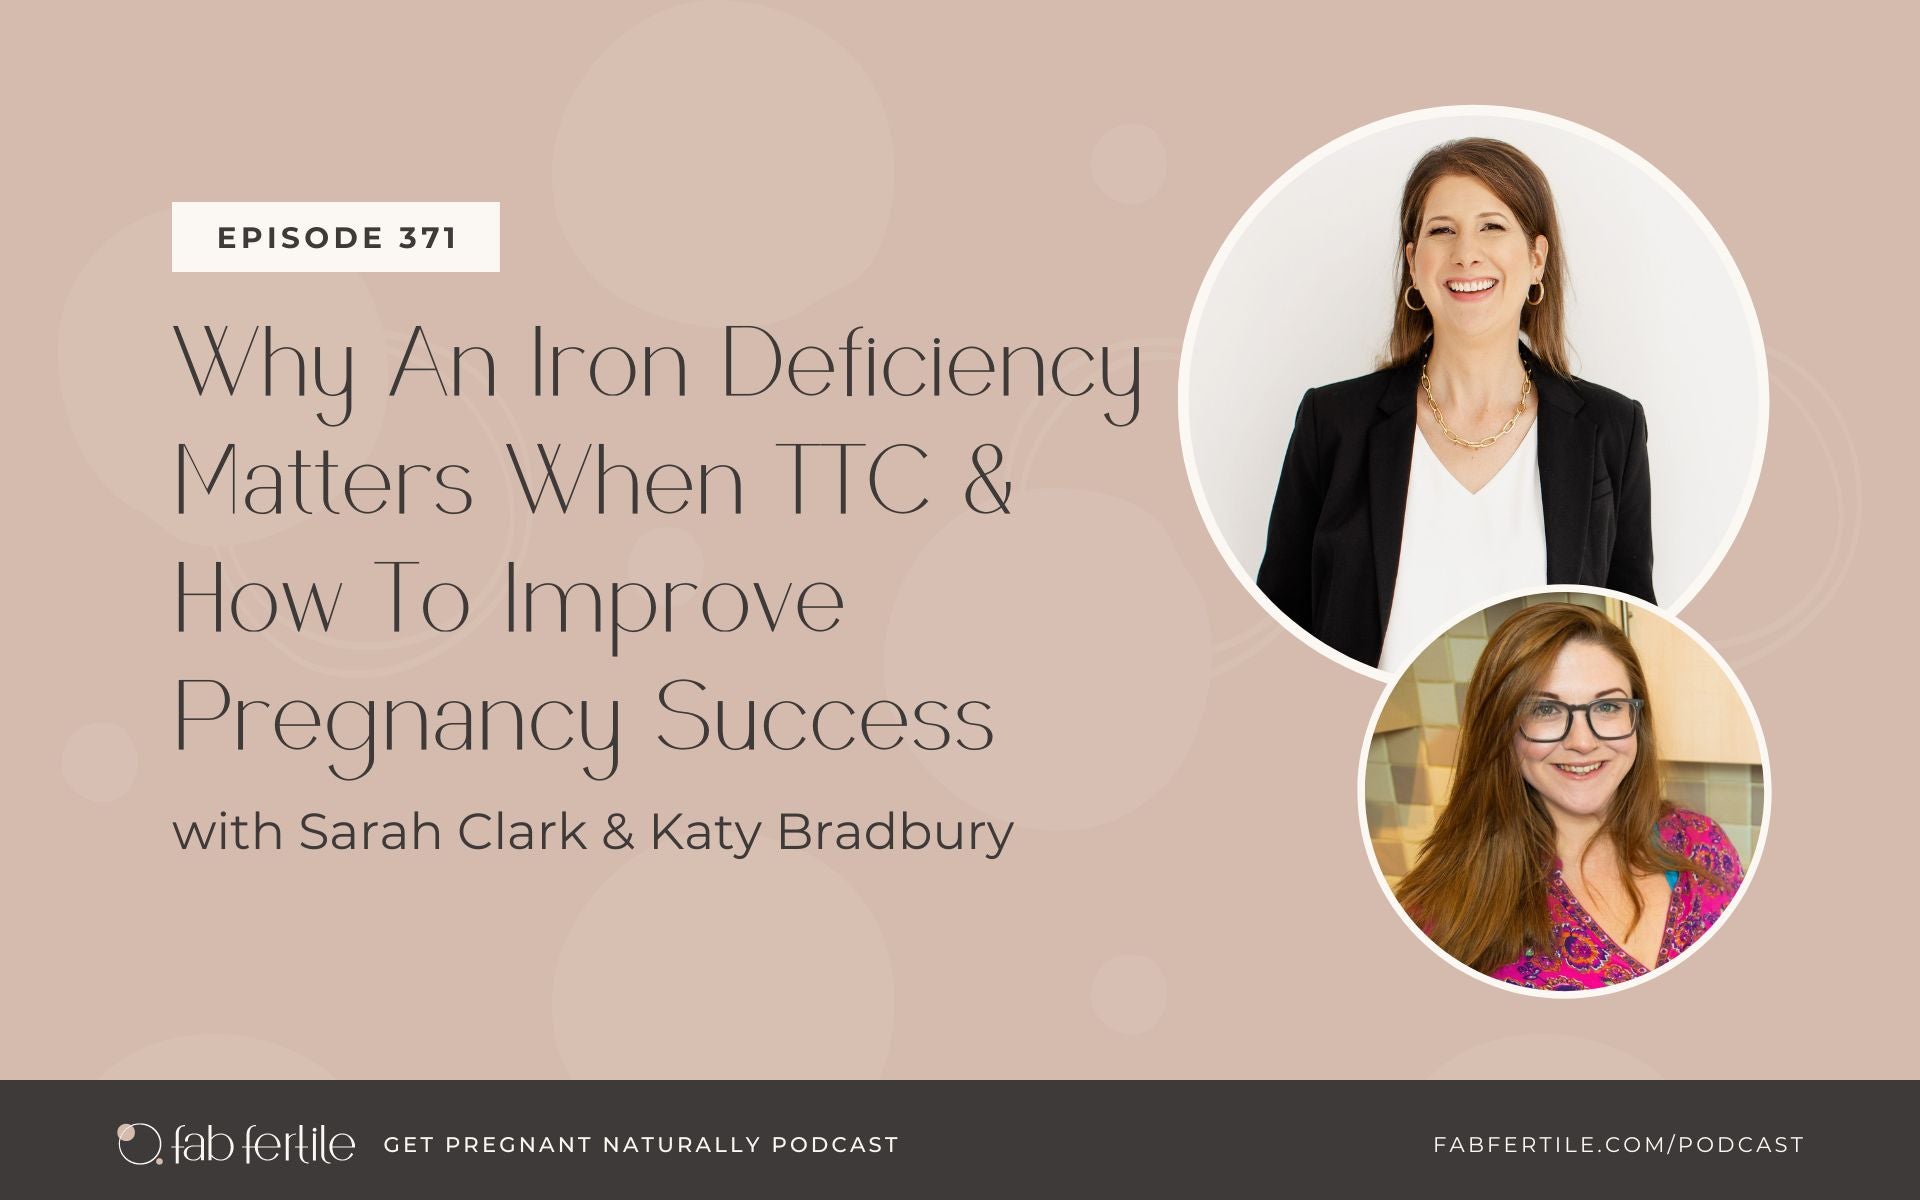 Why An Iron Deficiency Matters When TTC and How To Improve Pregnancy Success with Katy Bradbury